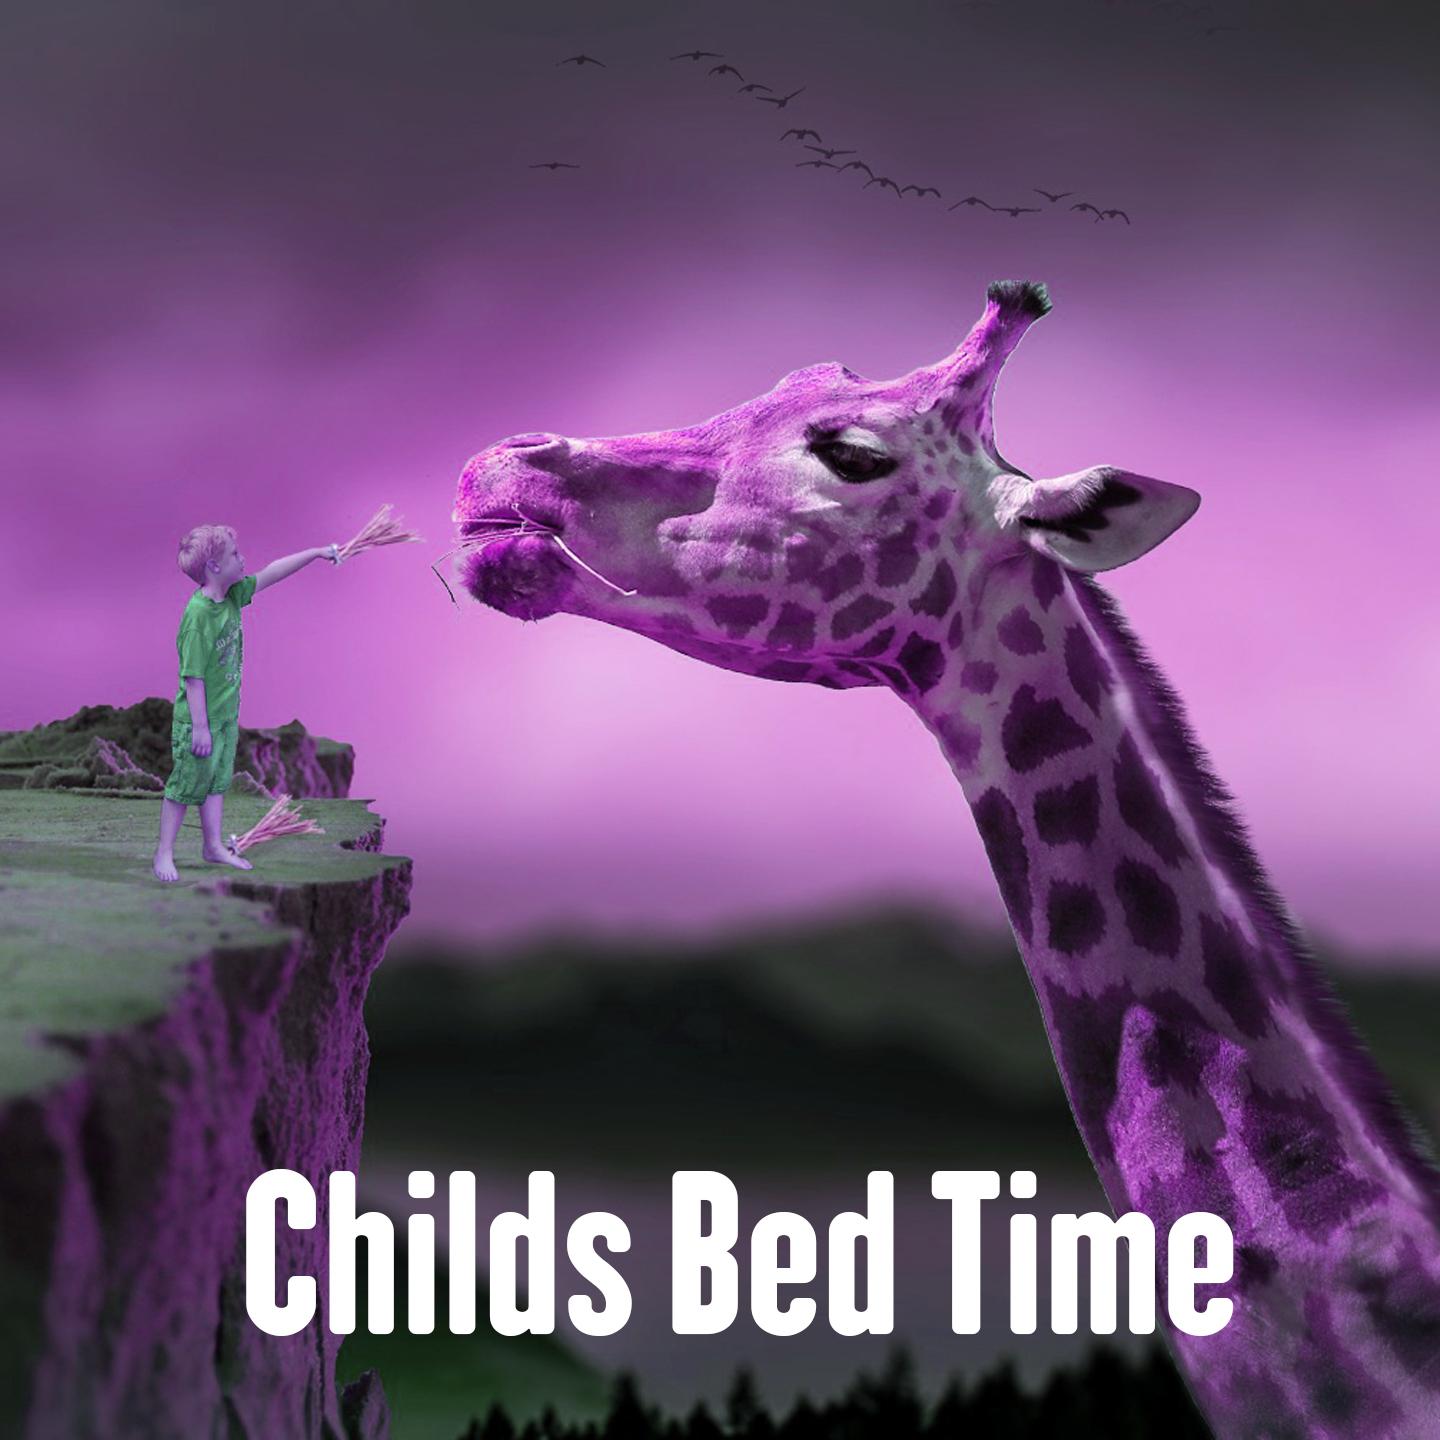 Childs Bed Time